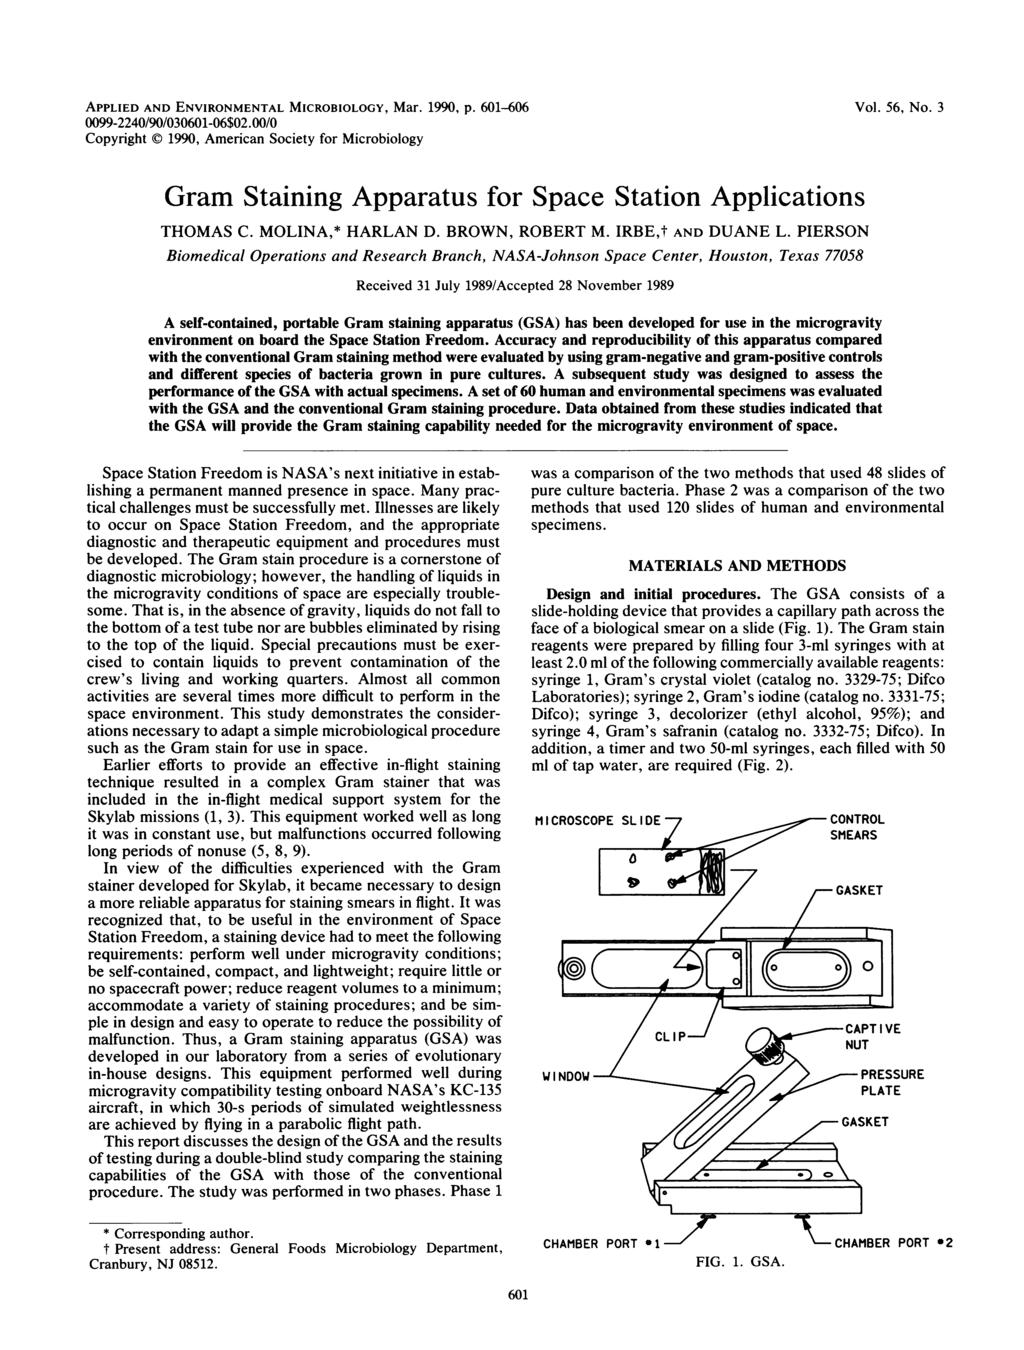 APPLIED AND ENVIRONMENTAL MICROBIOLOGY, Mar., p. - -//-$./ Copyright, American Society for Microbiology Vol., No. Gram Staining Apparatus for Space Station Applications THOMAS C. MOLINA,* HARLAN D.